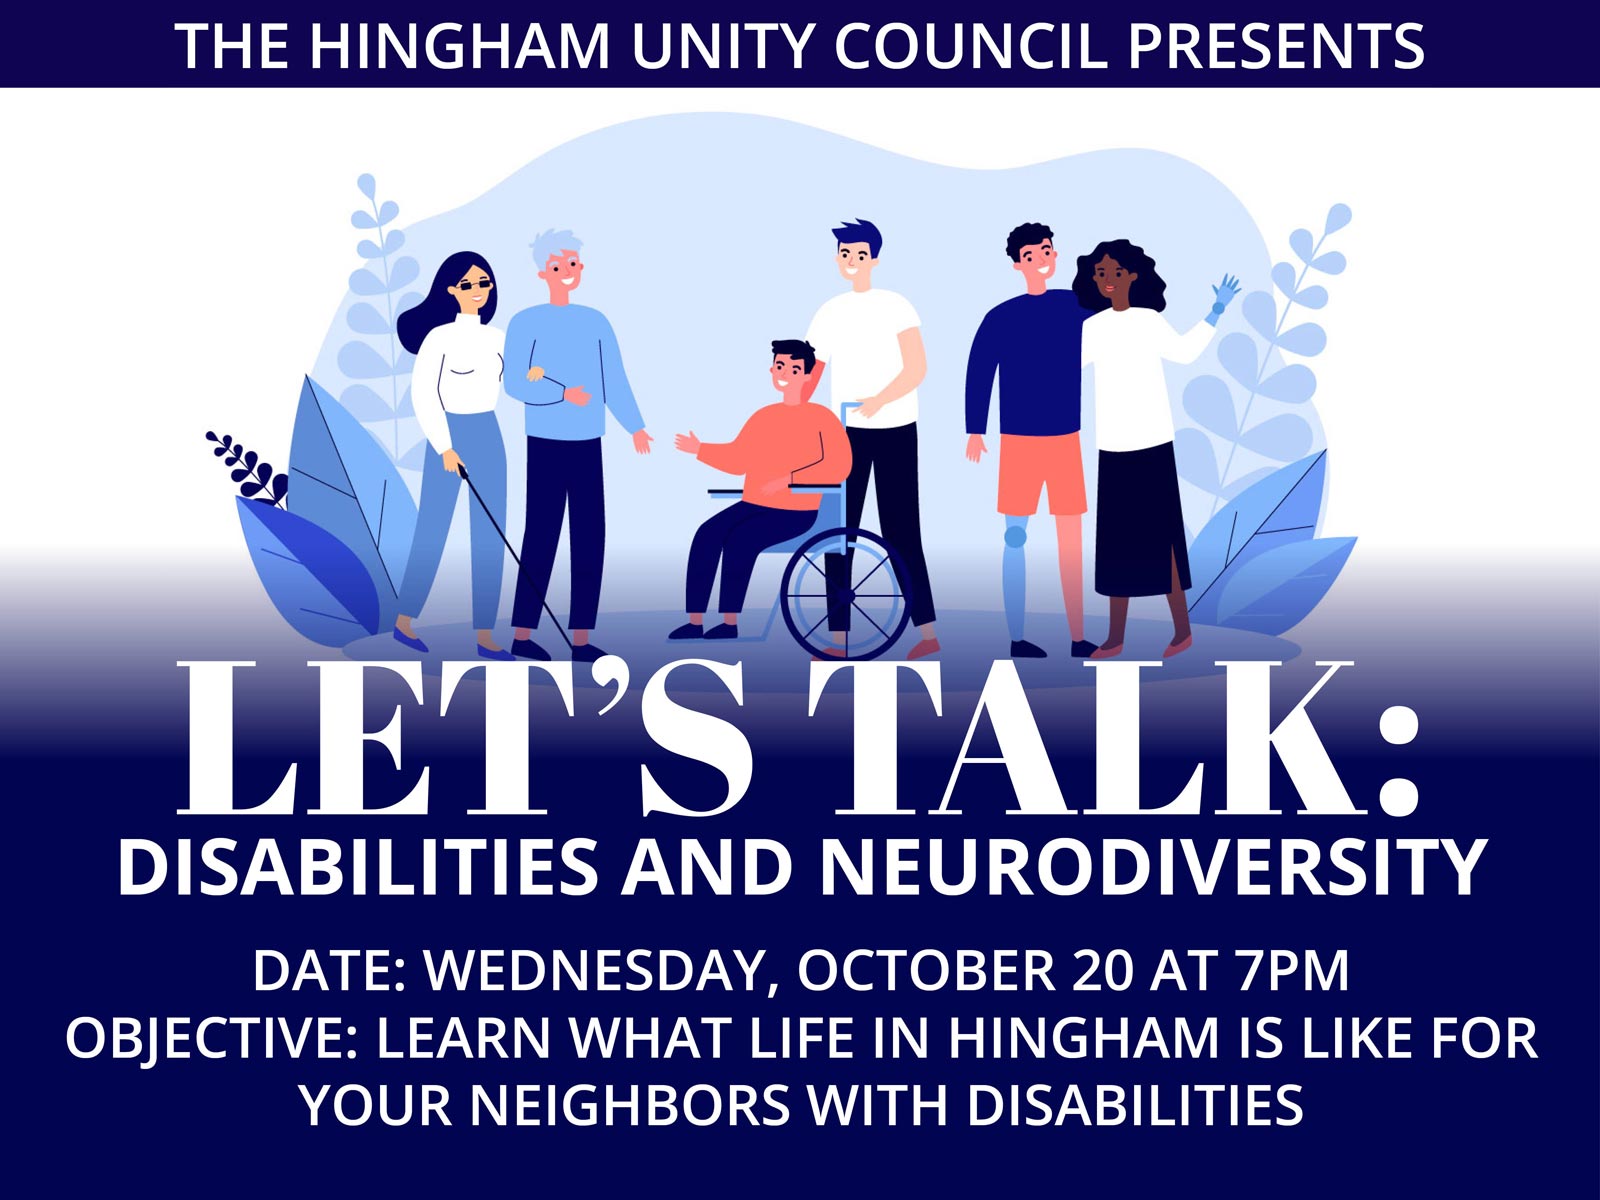 Let's Talk Disabiliites and Neurodiversity